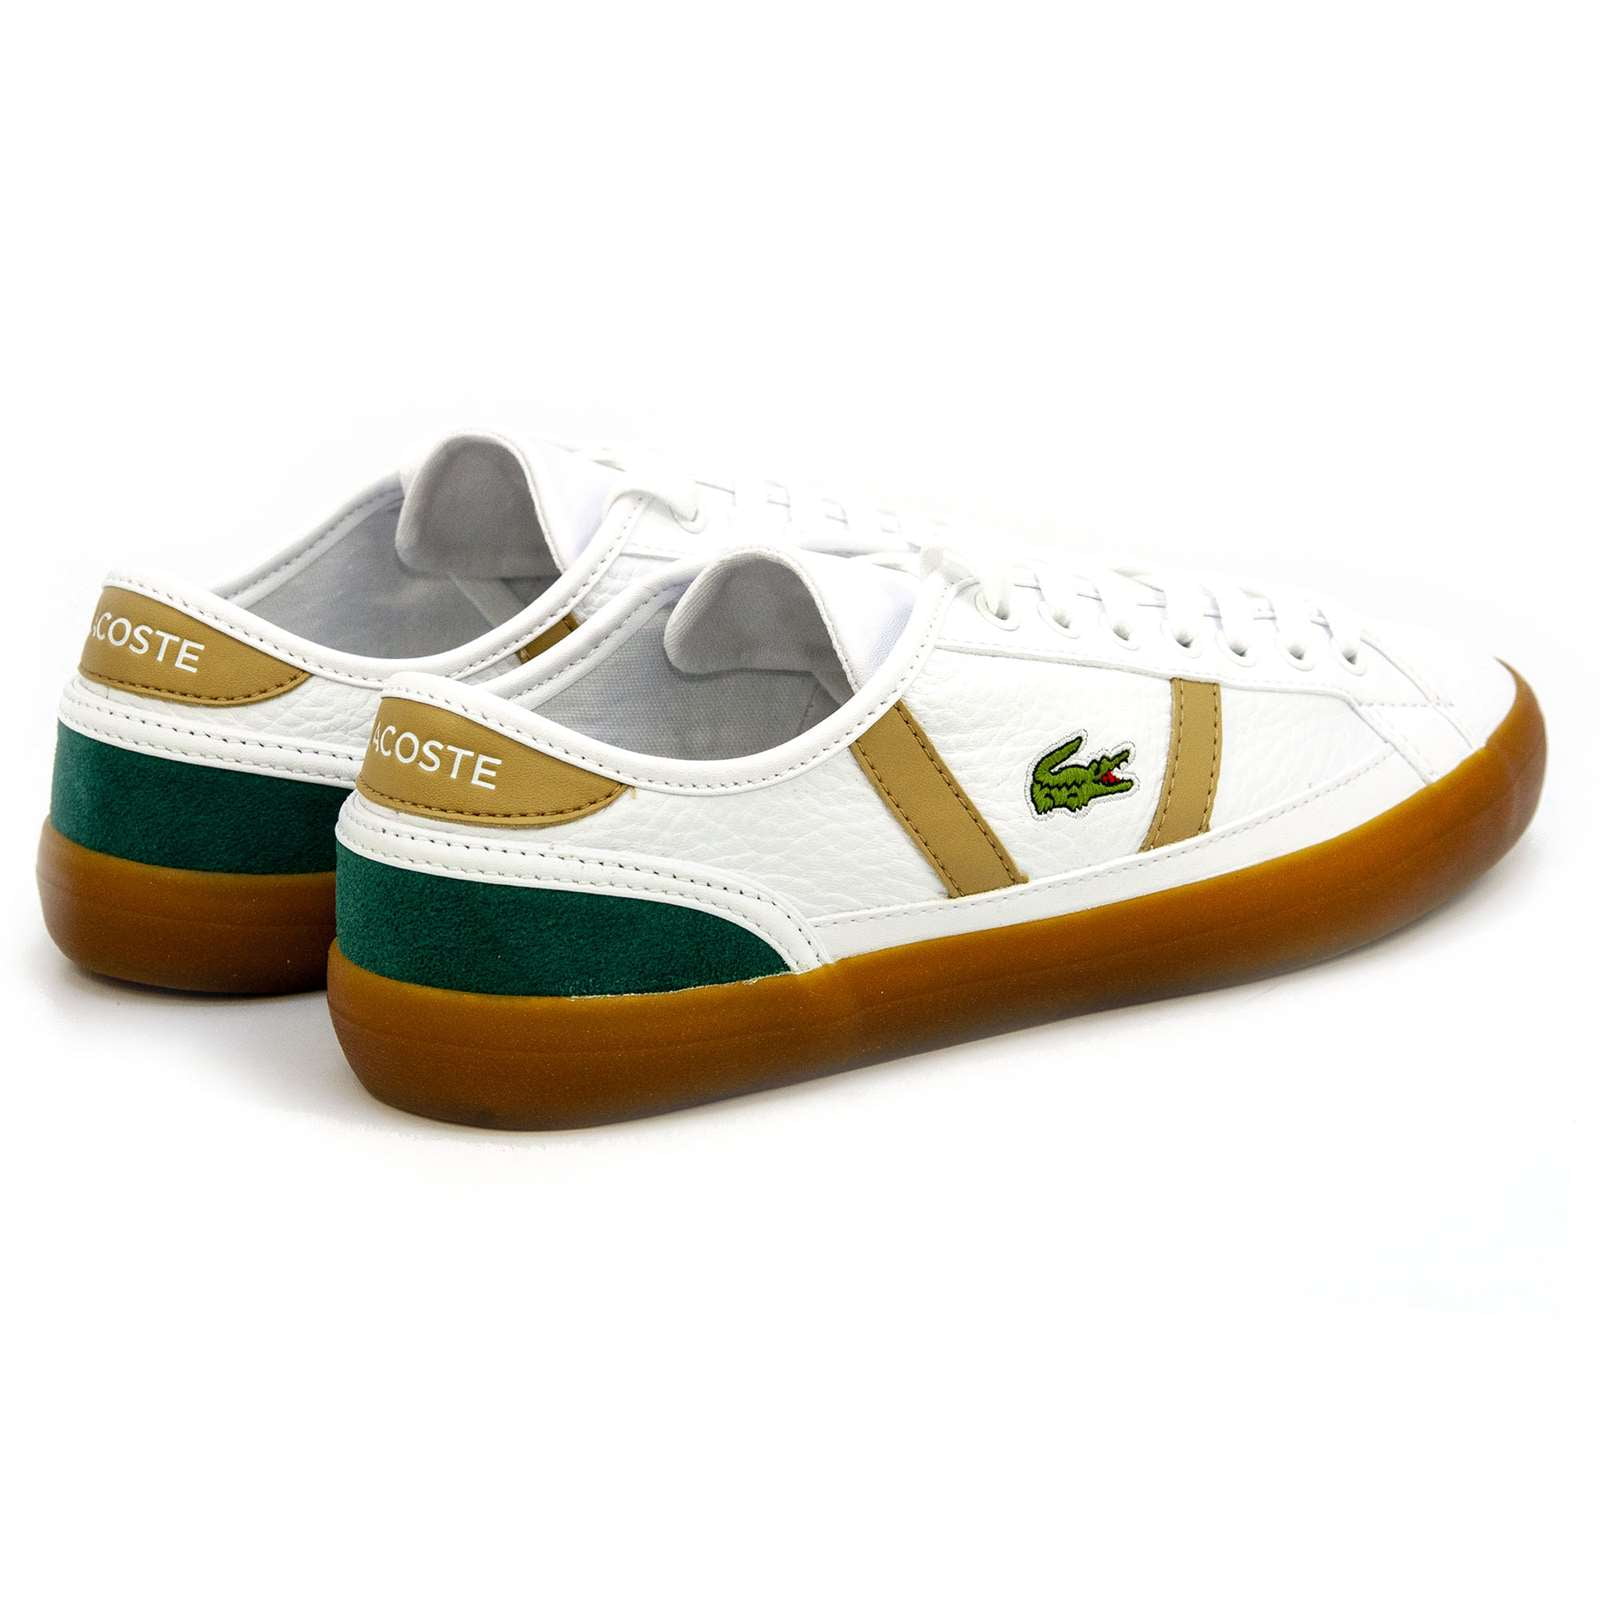 NEW Lacoste Men’s Casual Shoes Sideline Lace-Up Fashion Sneakers 